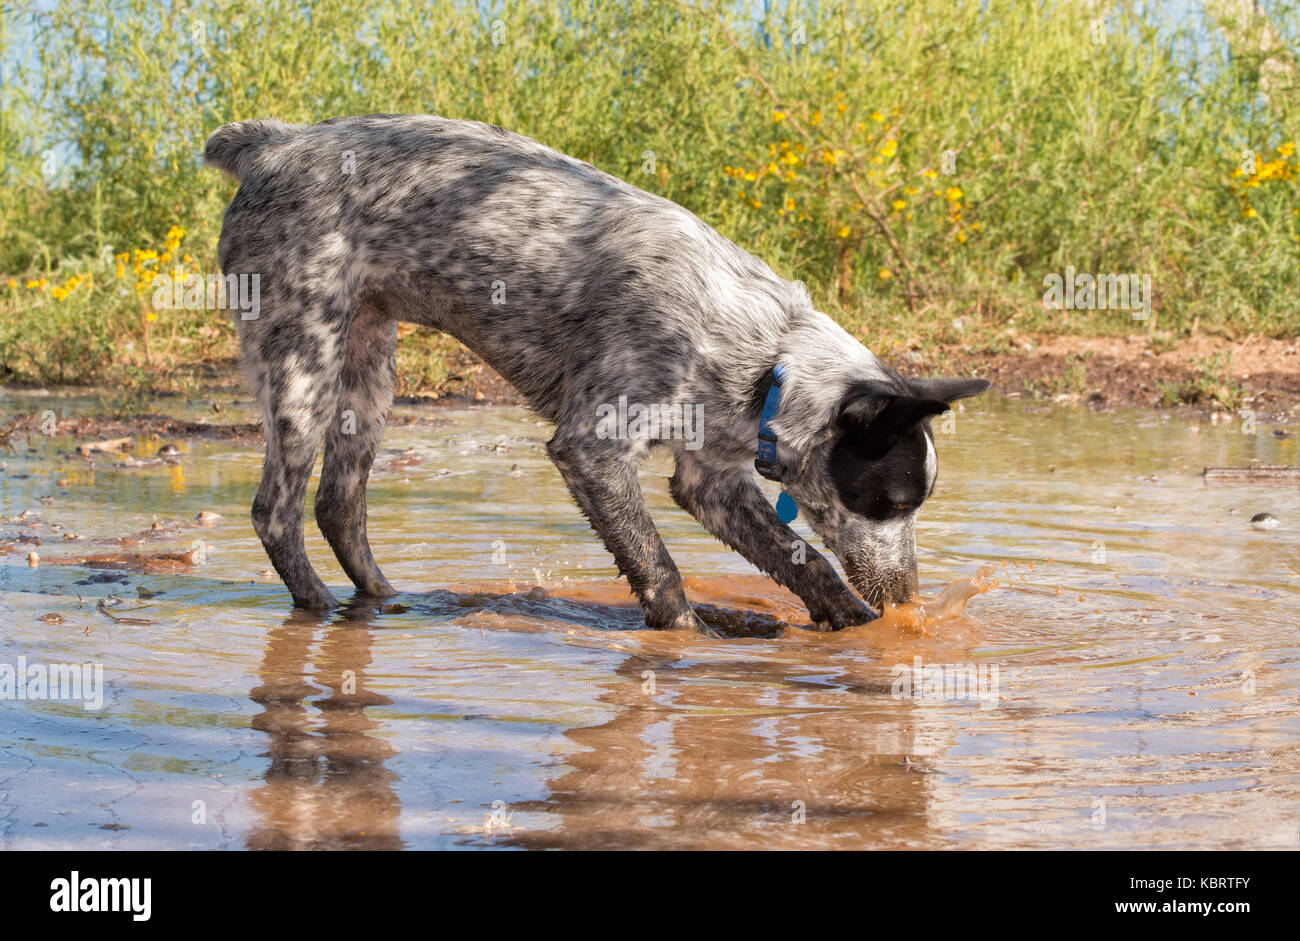 Black and white spotted dog splashing in a mud puddle Stock Photo